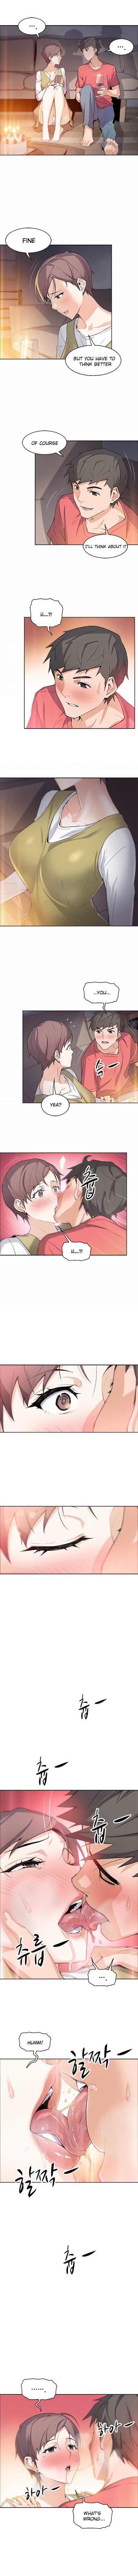 Uncut Housekeeper [Neck Pillow, Paper] Ch.49/49 [English] [Manhwa PDF] Completed Japan - Page 5